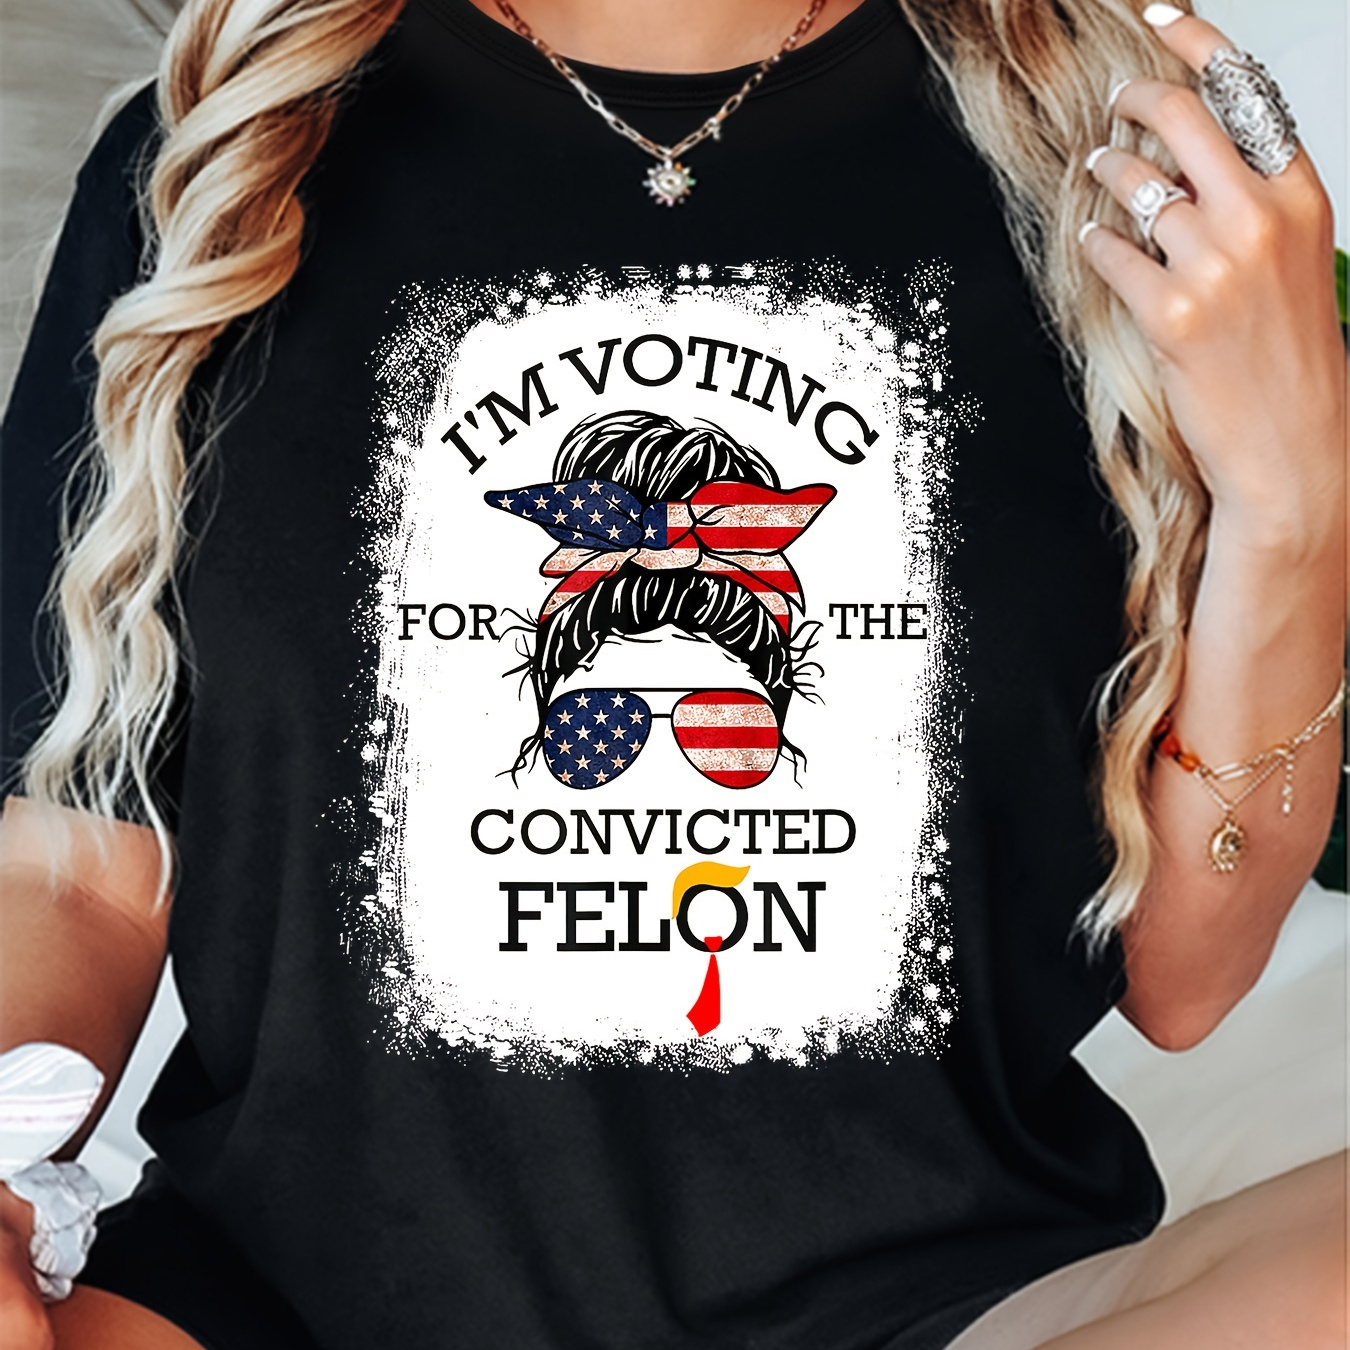 

Flag Scarf Sunglasses Girls Printed Round Neck T-shirt, Spring & Summer Short Sleeve T-shirt, Sports Casual Everyday Top, Women's Wear